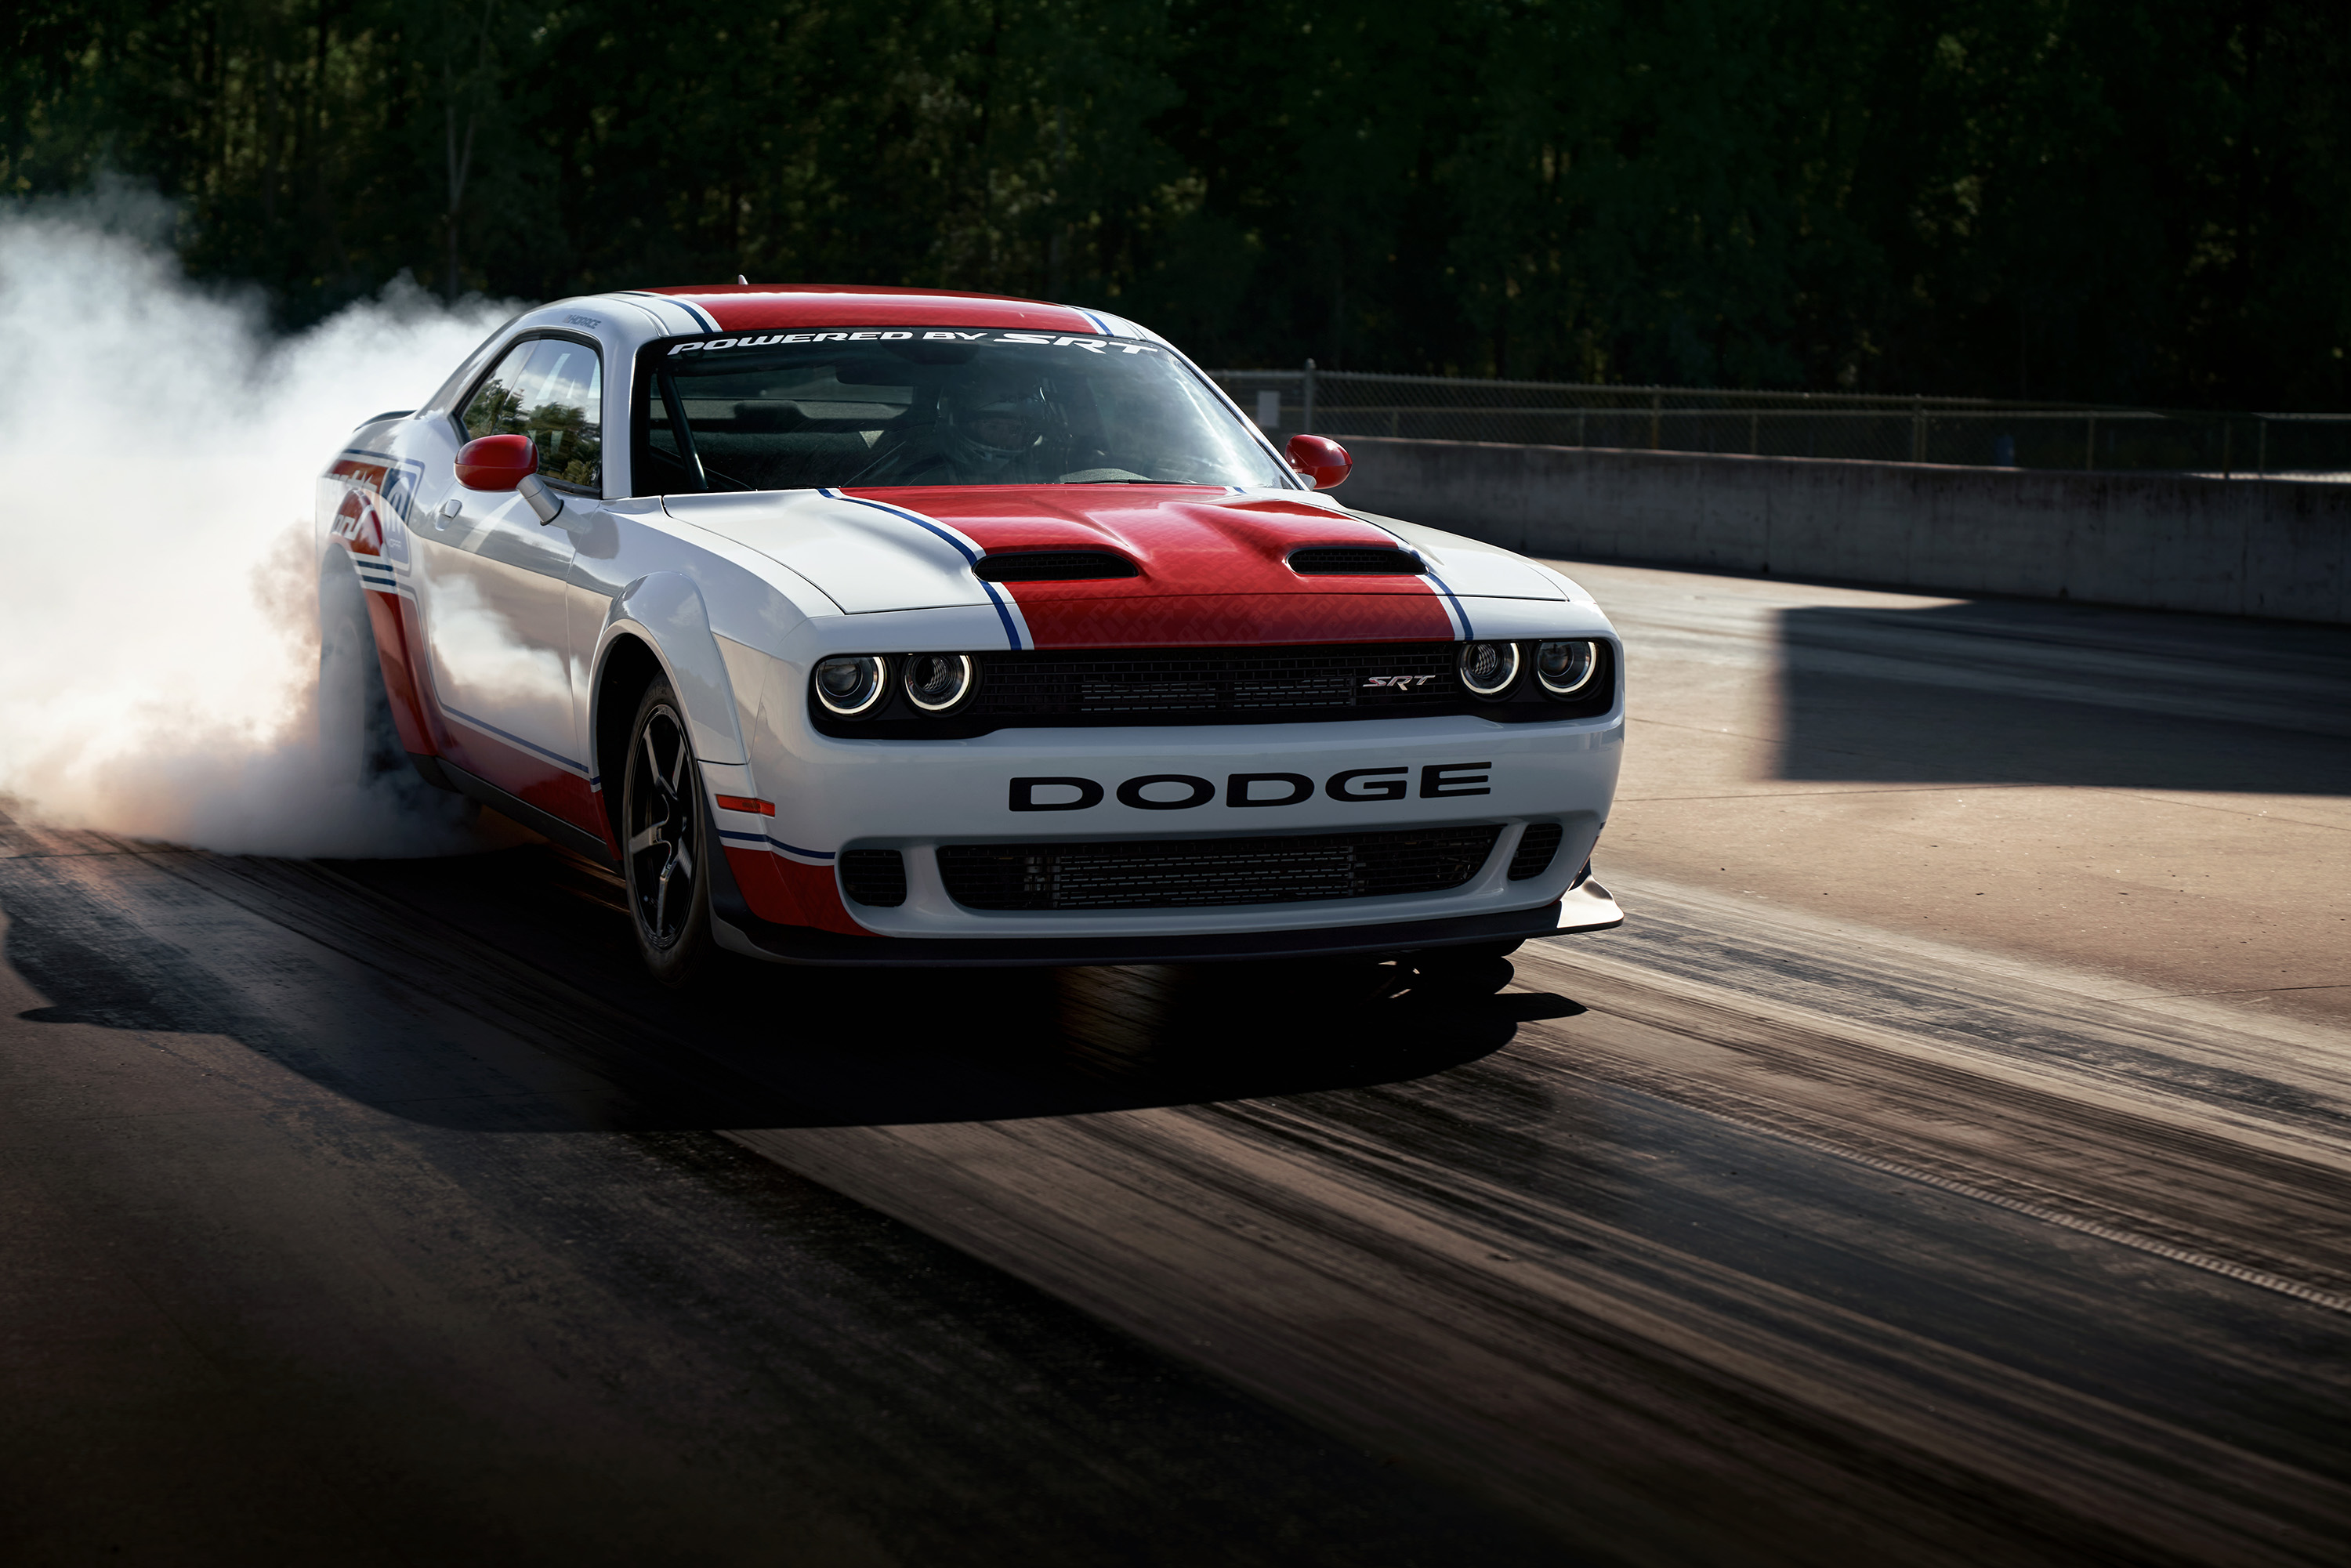 Dodge Announces “Never Lift” Two-Year Business Plan; Highlights Performance